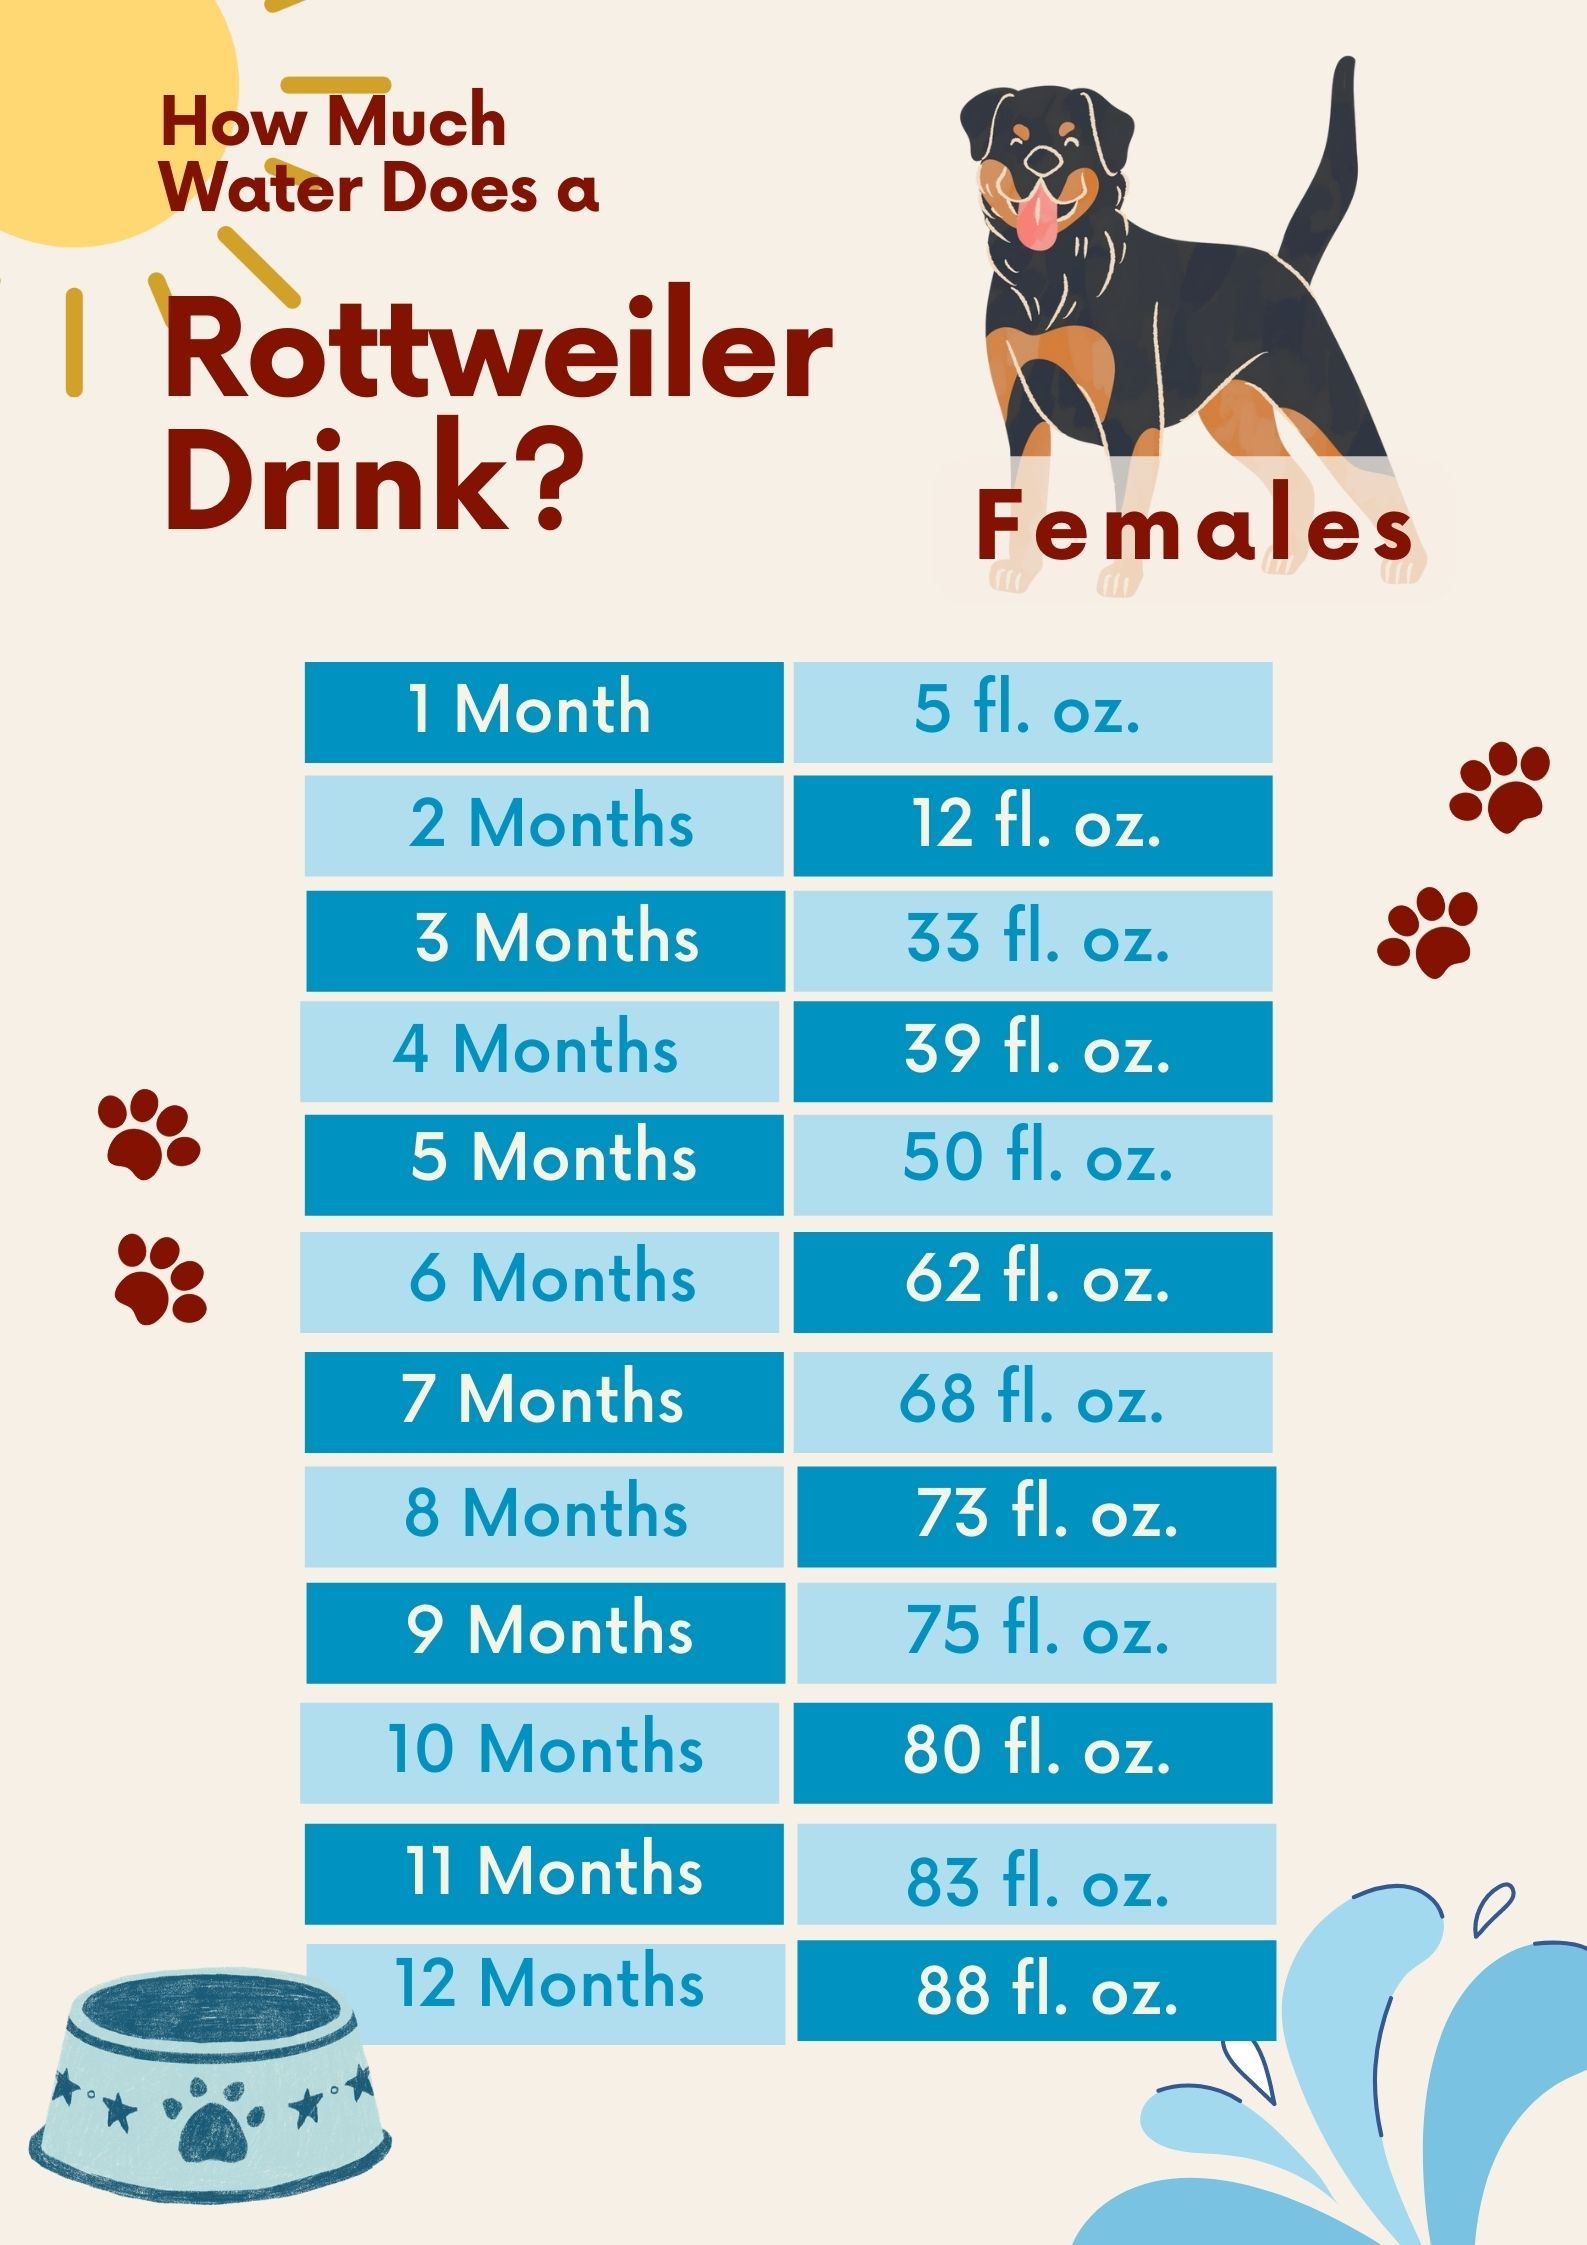 How Much Does A Rottweiler Drink